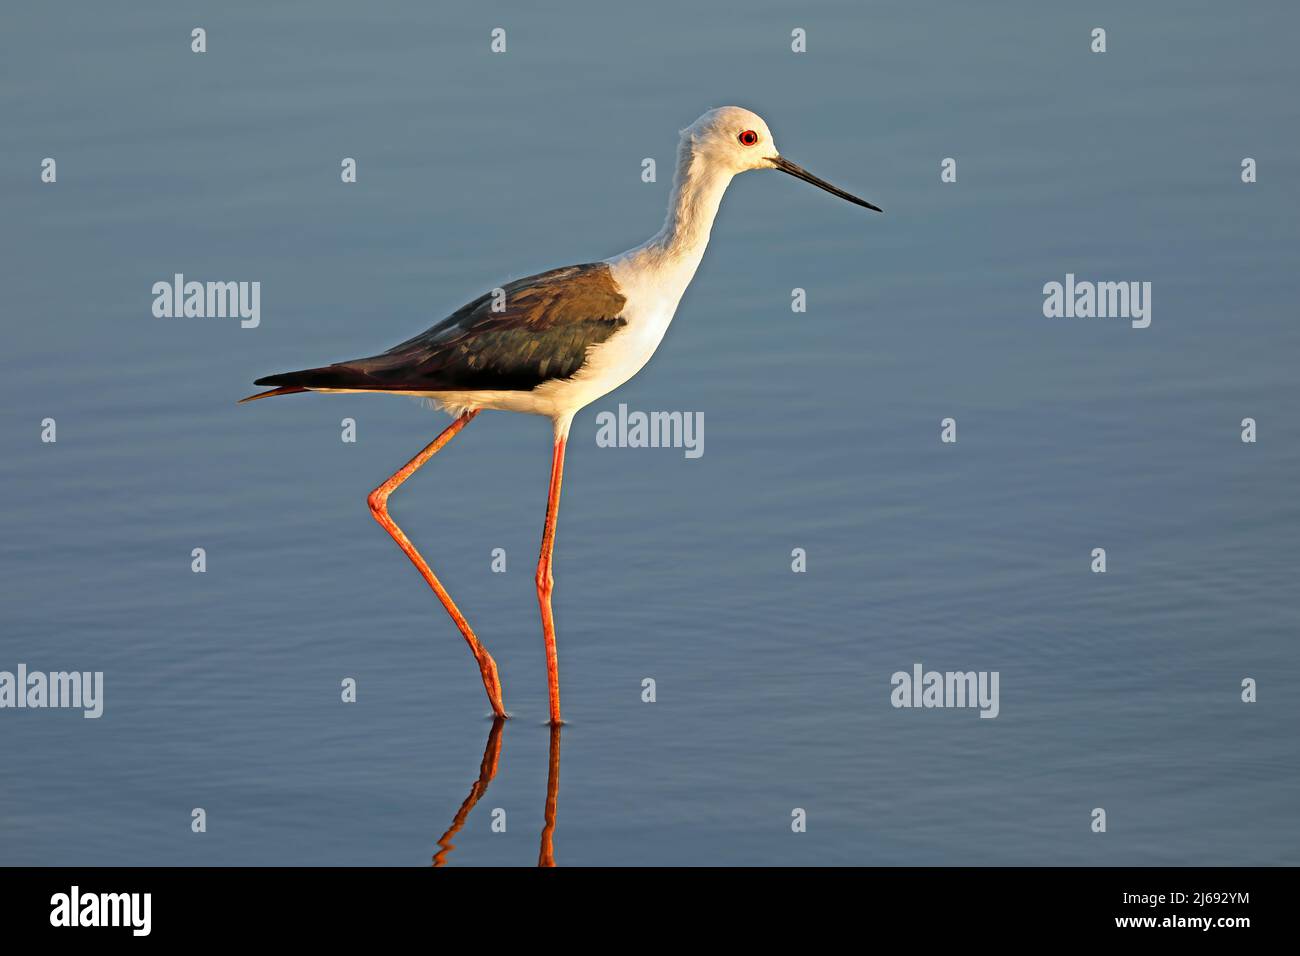 Black-winged stilt (Himantopus himantopis) wading in shallow water, South Africa Stock Photo